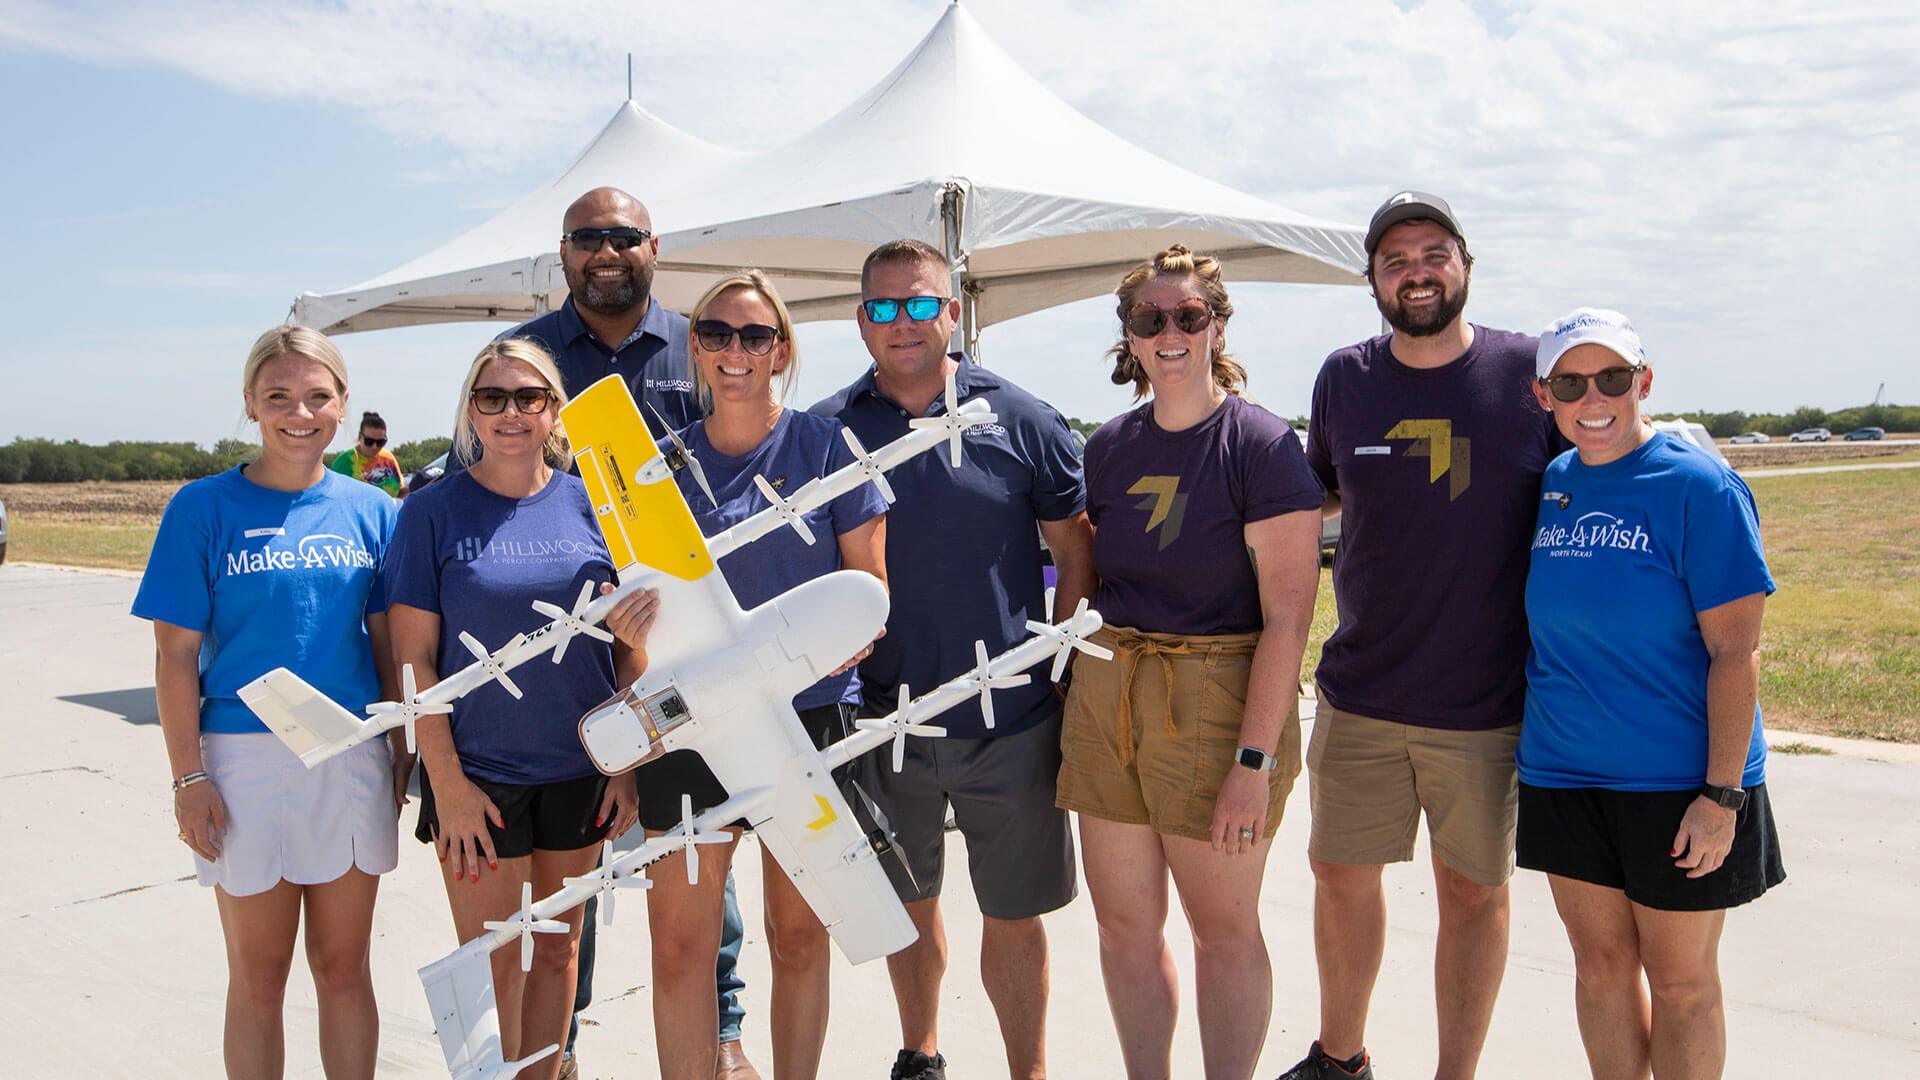 Hillwood employees are shown with a large model plane.